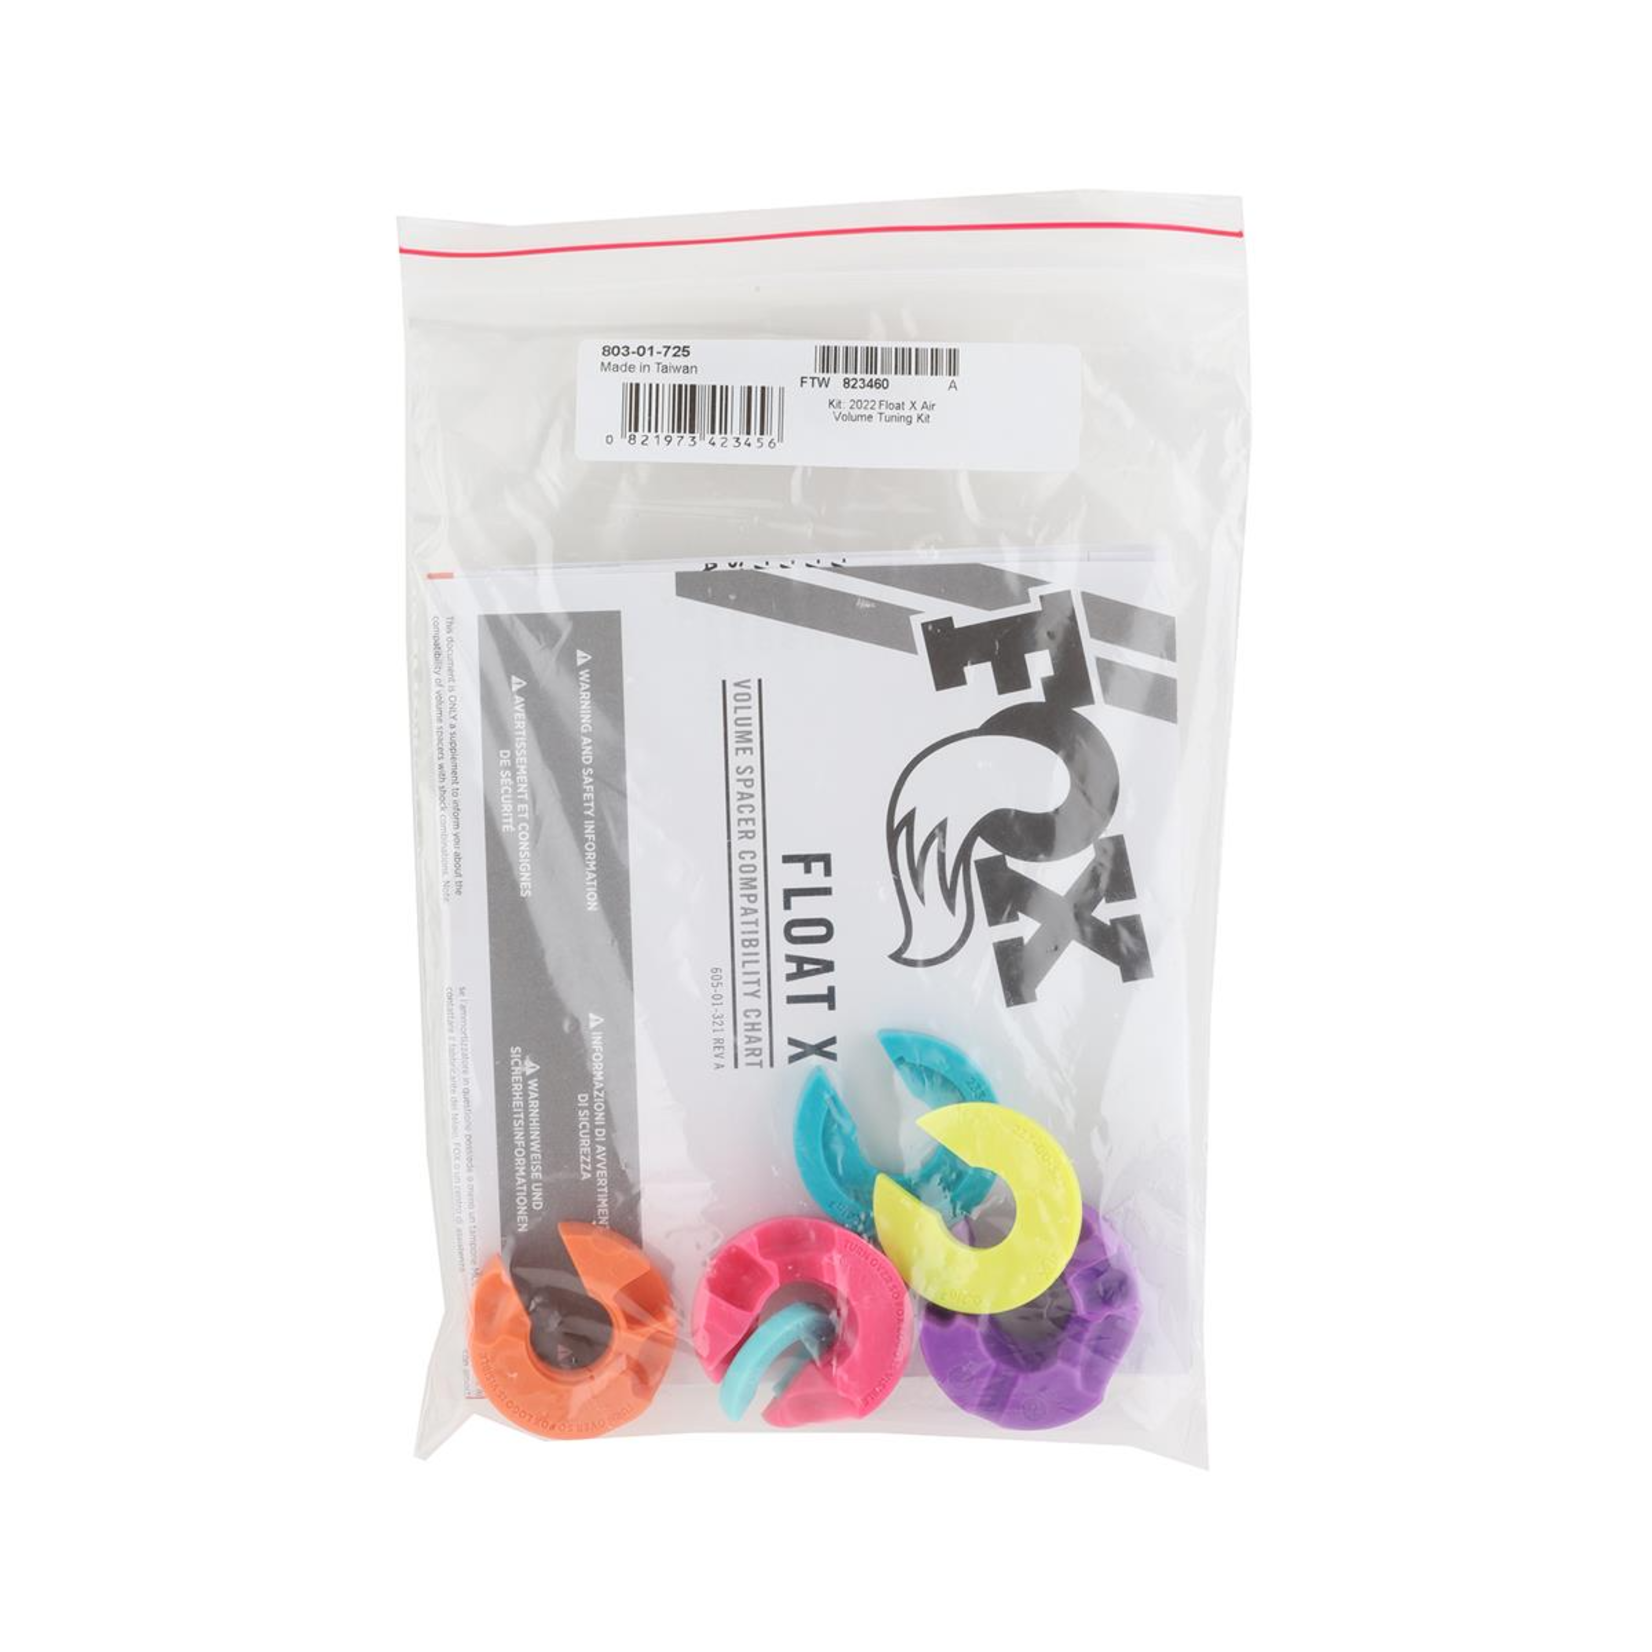 FOX Volume Spacers - Float X Air, 2022, Assorted Kit